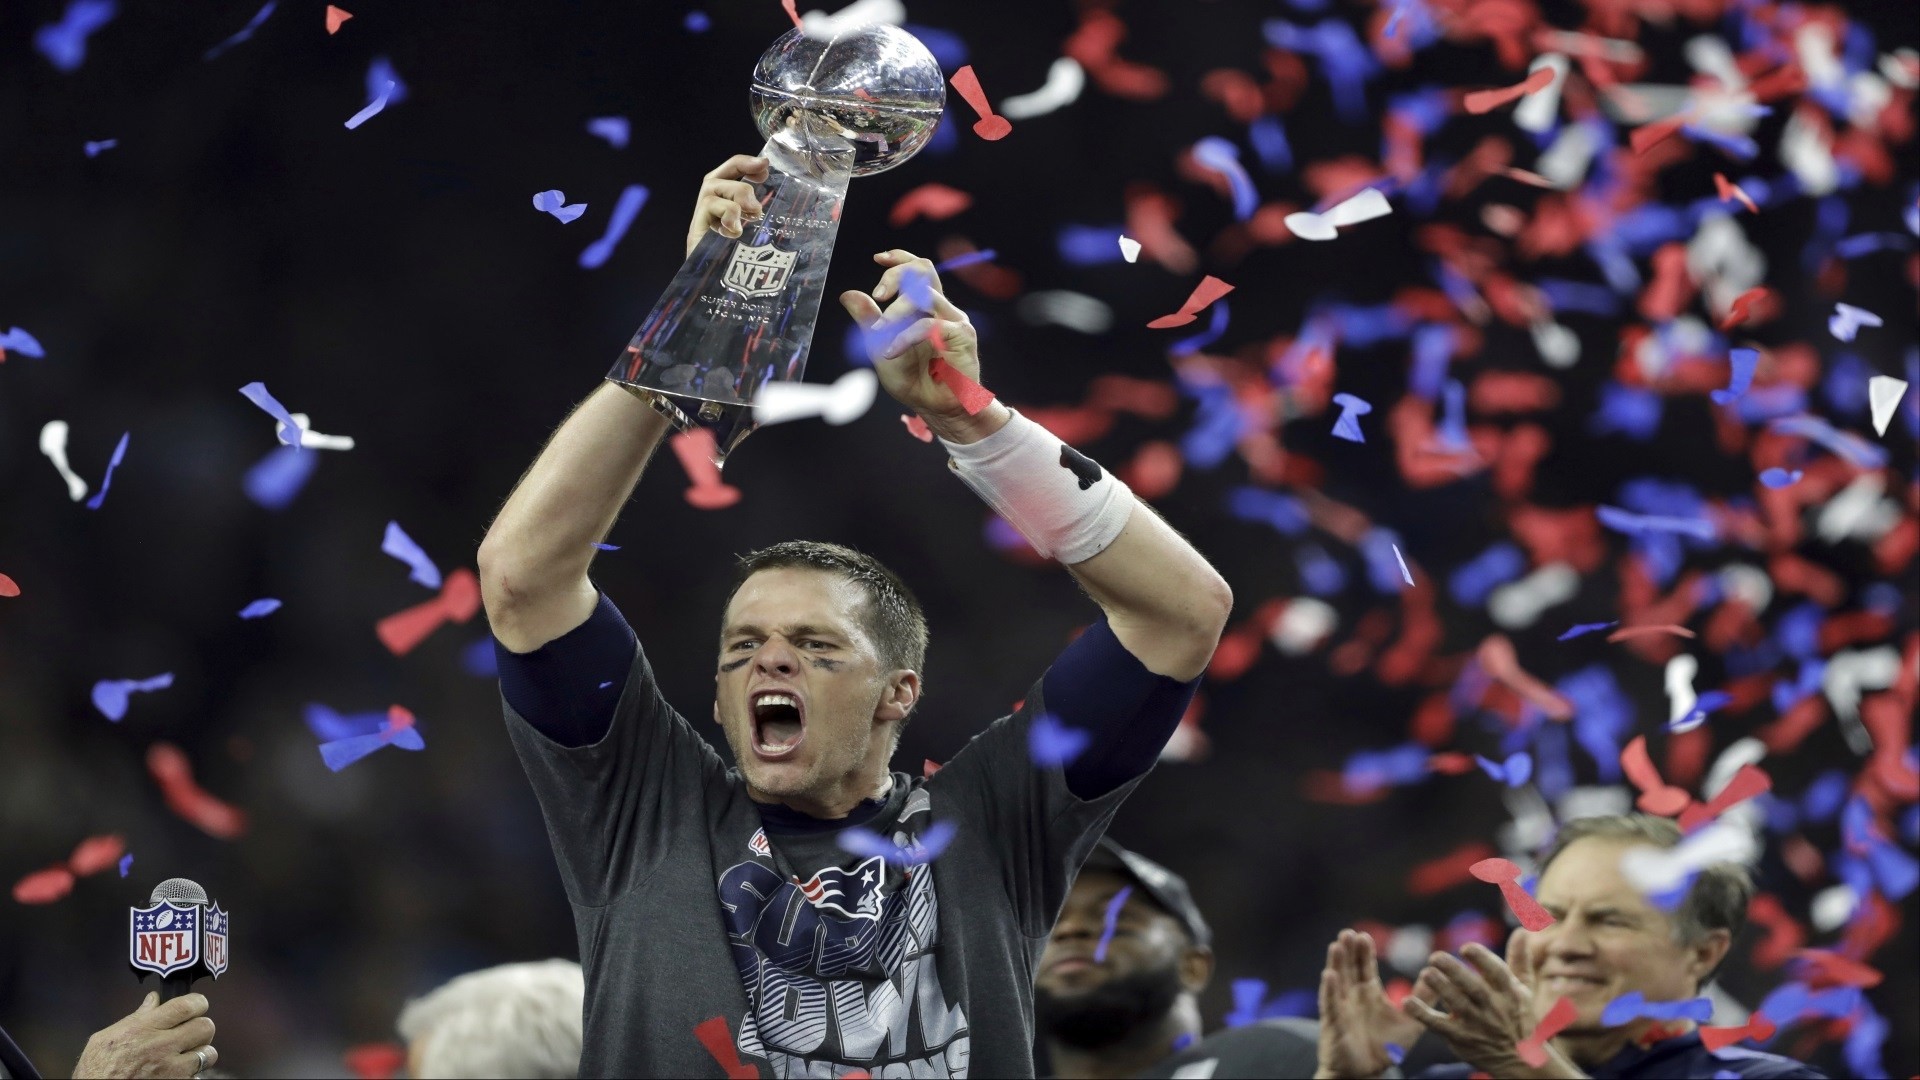 1920x1080 New England Patriots' Tom Brady raises the Vince Lombardi Trophy after  defeating the Atlanta Falcons